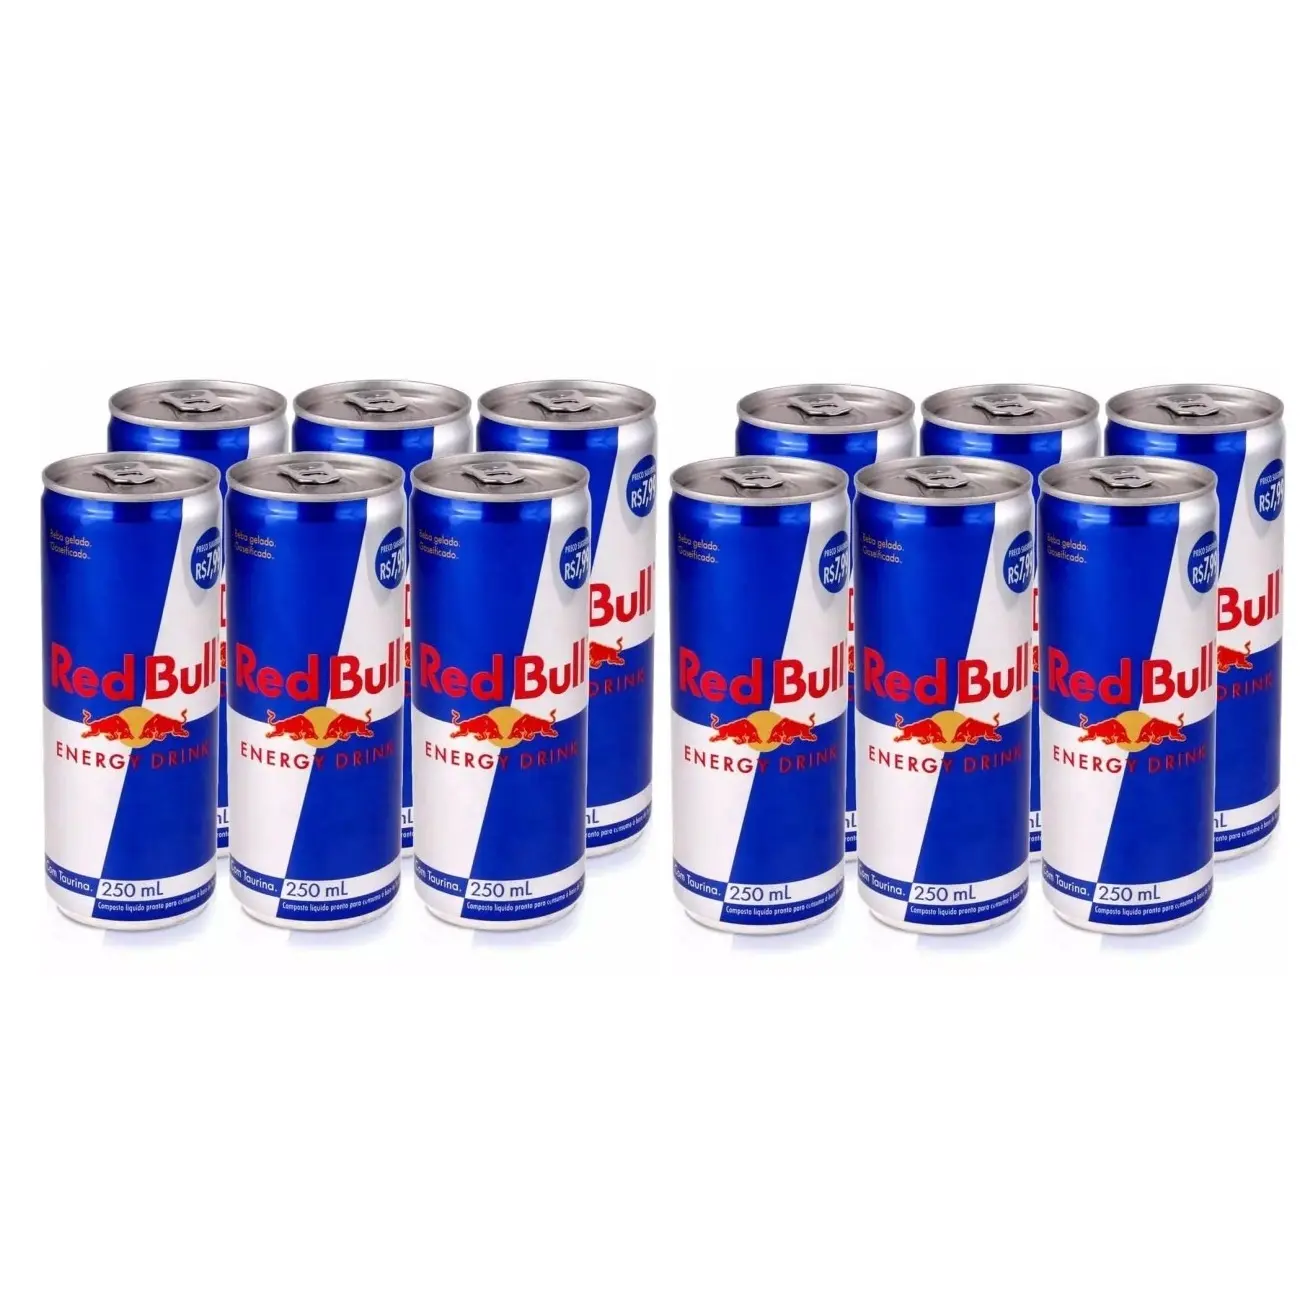 Discount Offer Original Red Bull 250ml Energy Drink Ready To Export Redbull